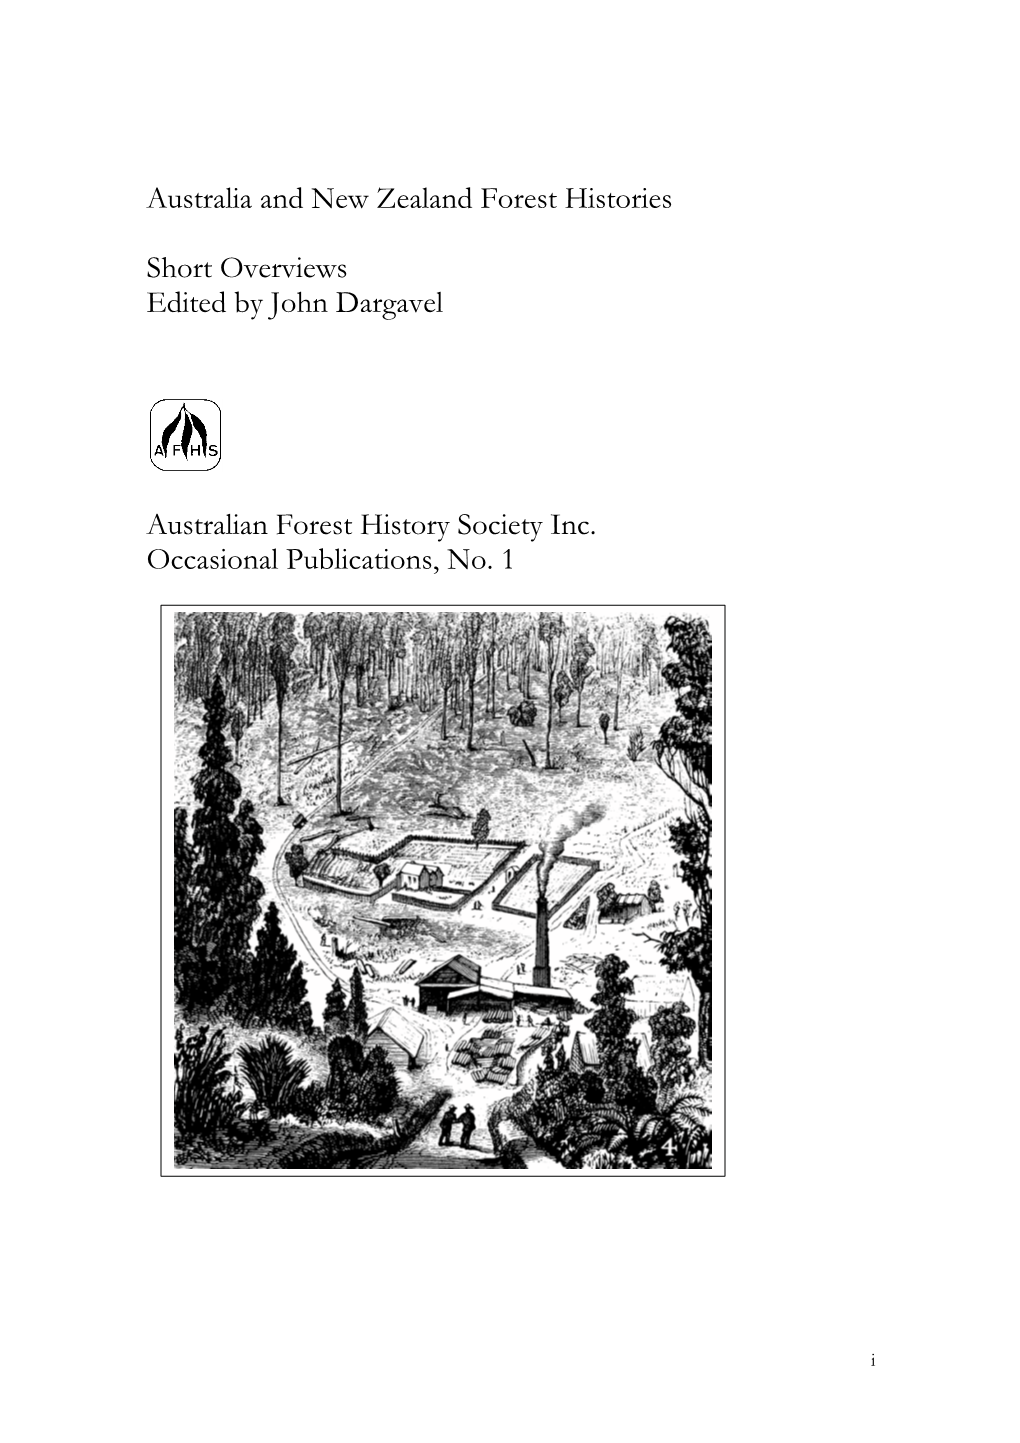 Historical Biogeography of Australian Forests 1 Alison Specht and Raymond L